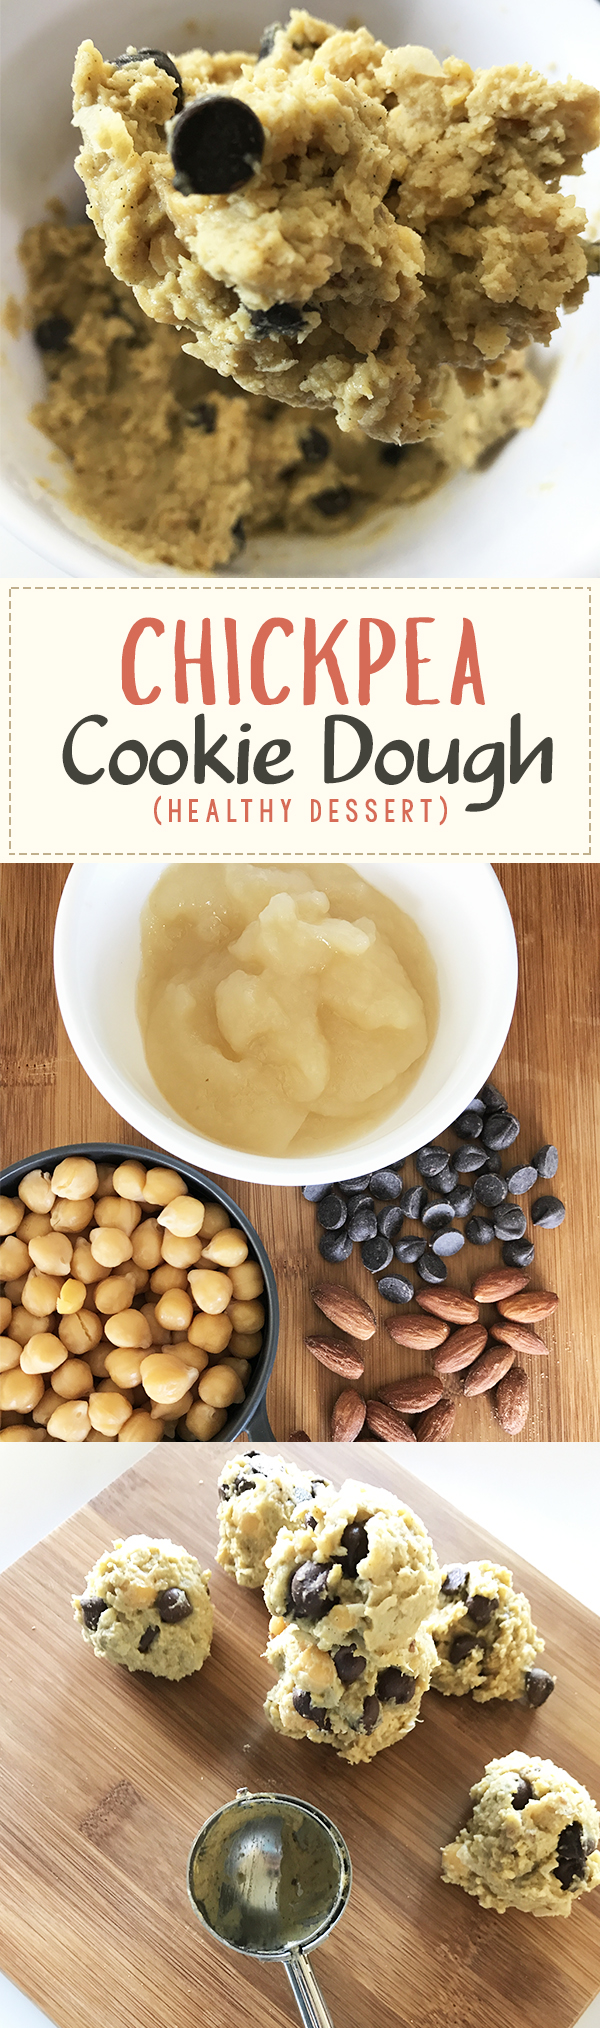 Healthy chickpea cookie dough energy bites - gluten free, dairy free, vegan option, totally delicious healthy snack